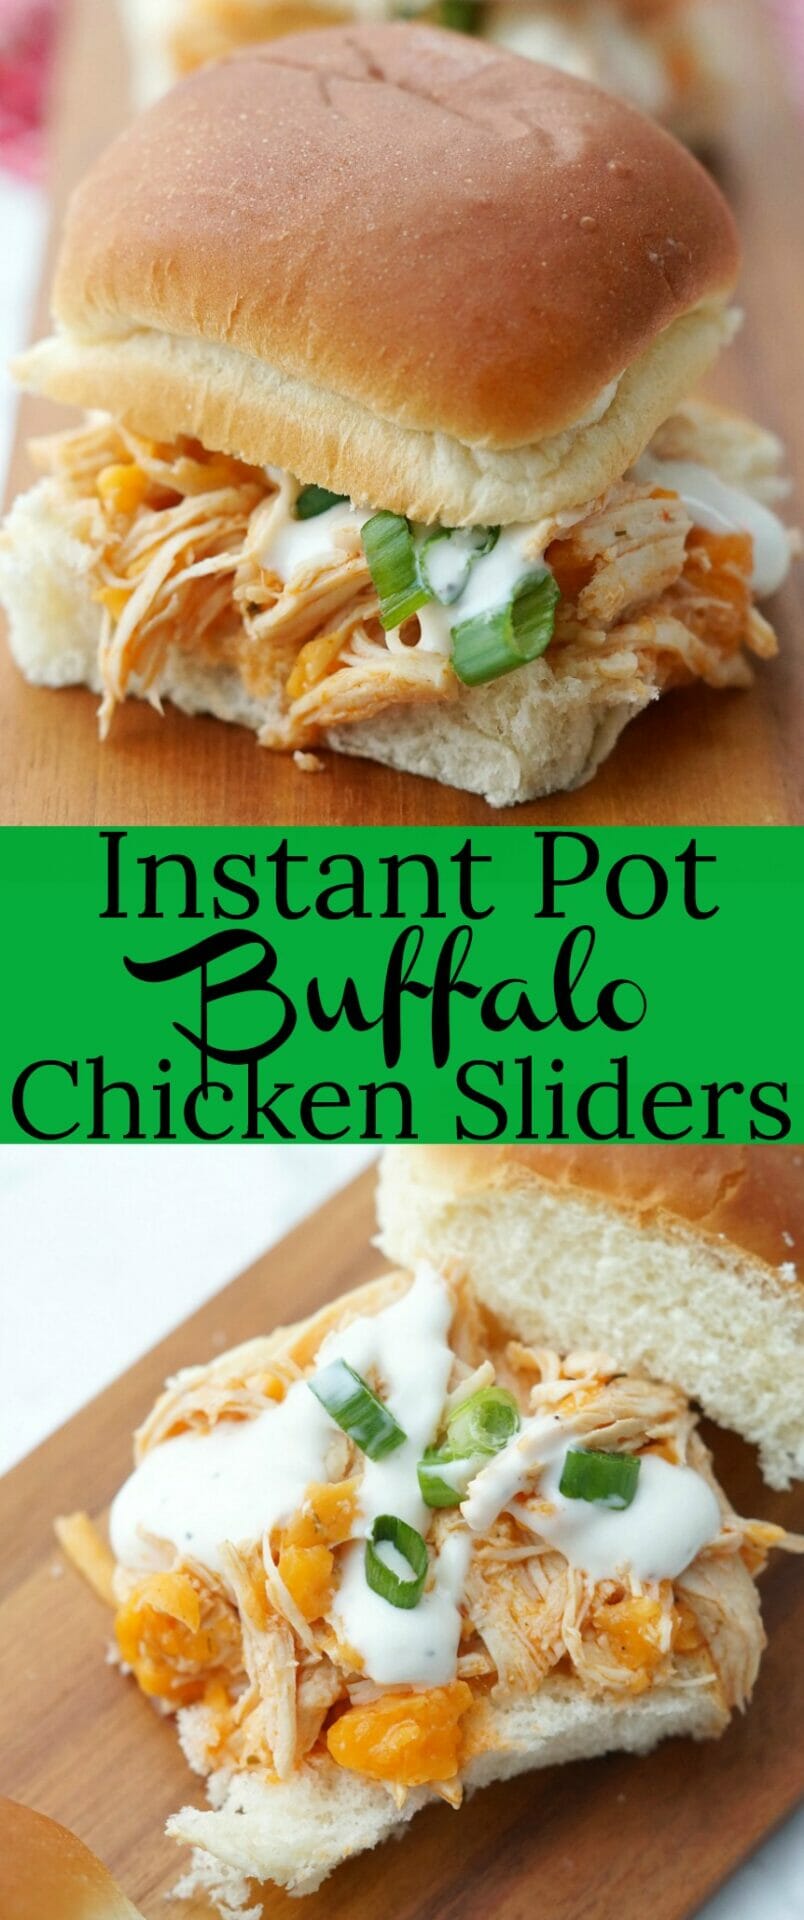 Easy Instant Pot Buffalo Chicken Sliders. Such an easy sandwich recipe made in minutes in the Instant Pot!